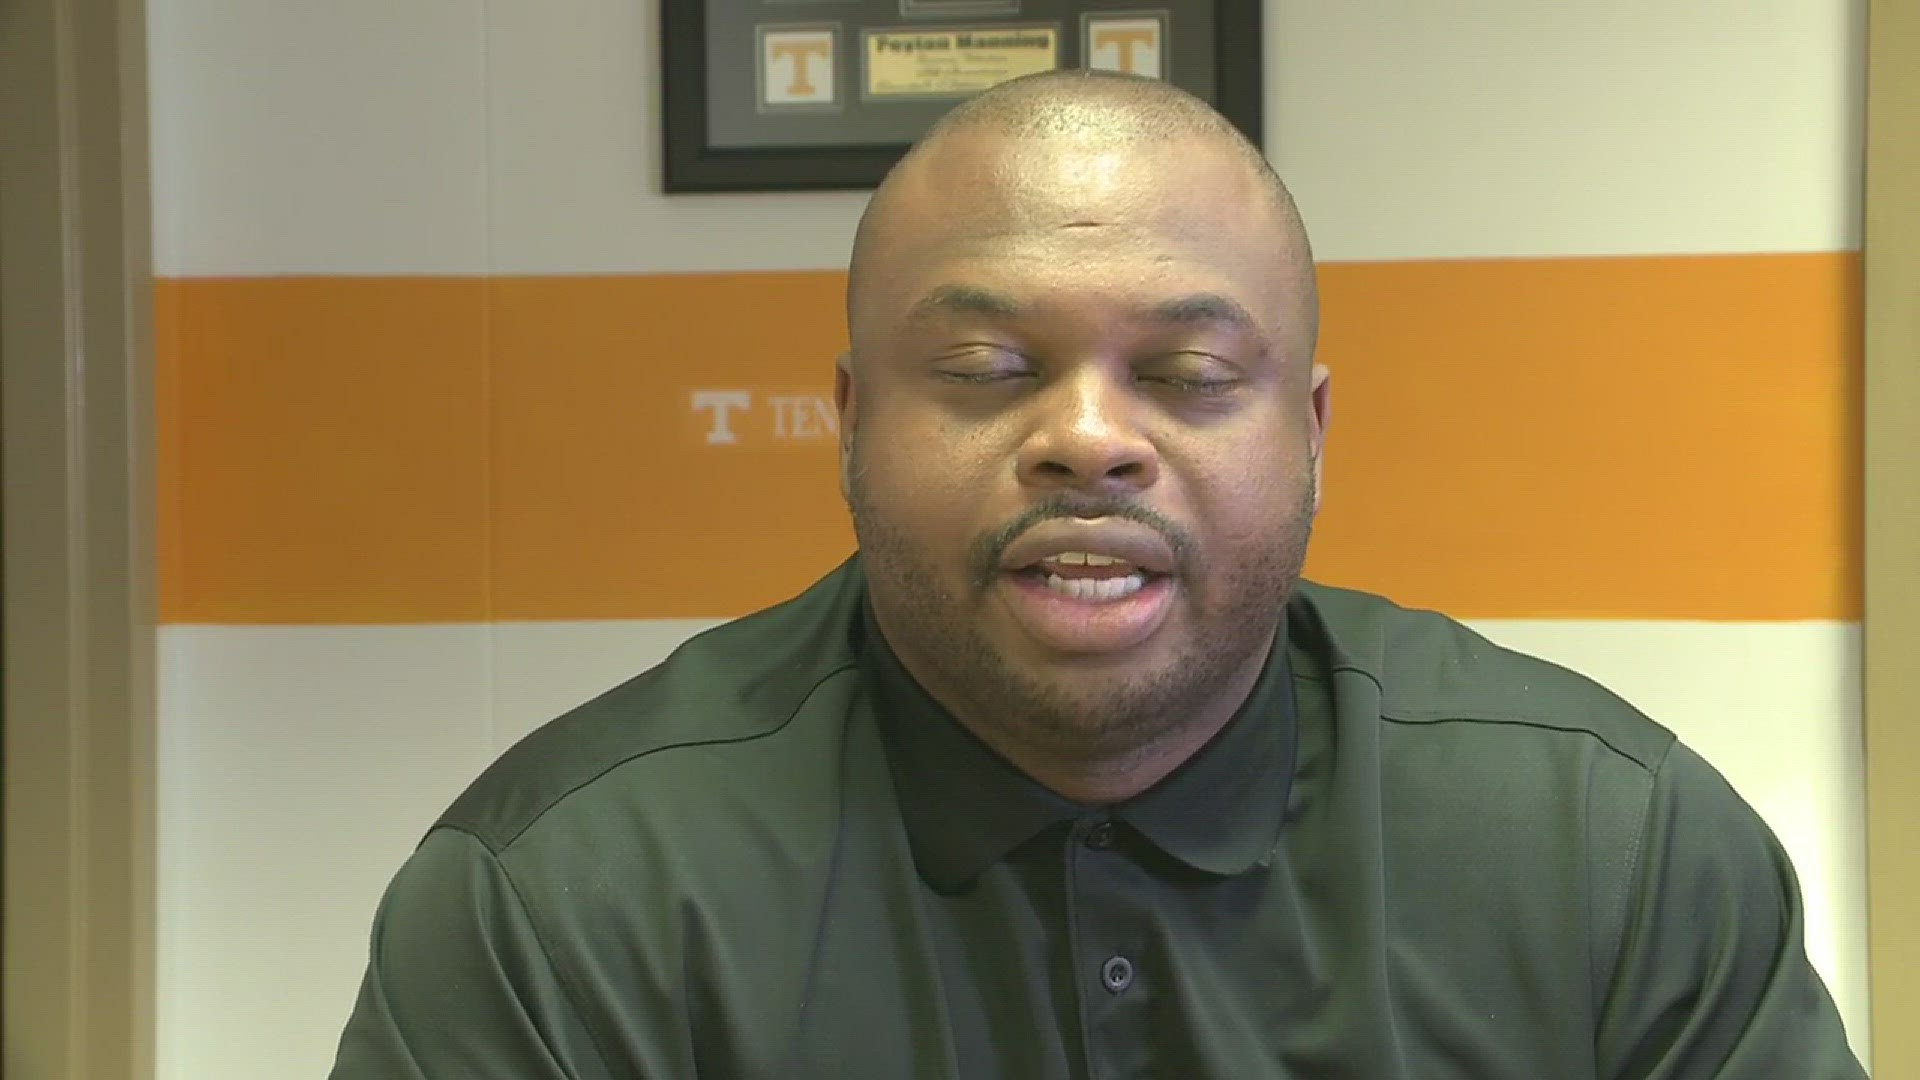 VFL Jayson Swain, analyst and host of The Swain Event, broke down his top three keys for the Vols to pull out a win against the Florida Gators Saturday.